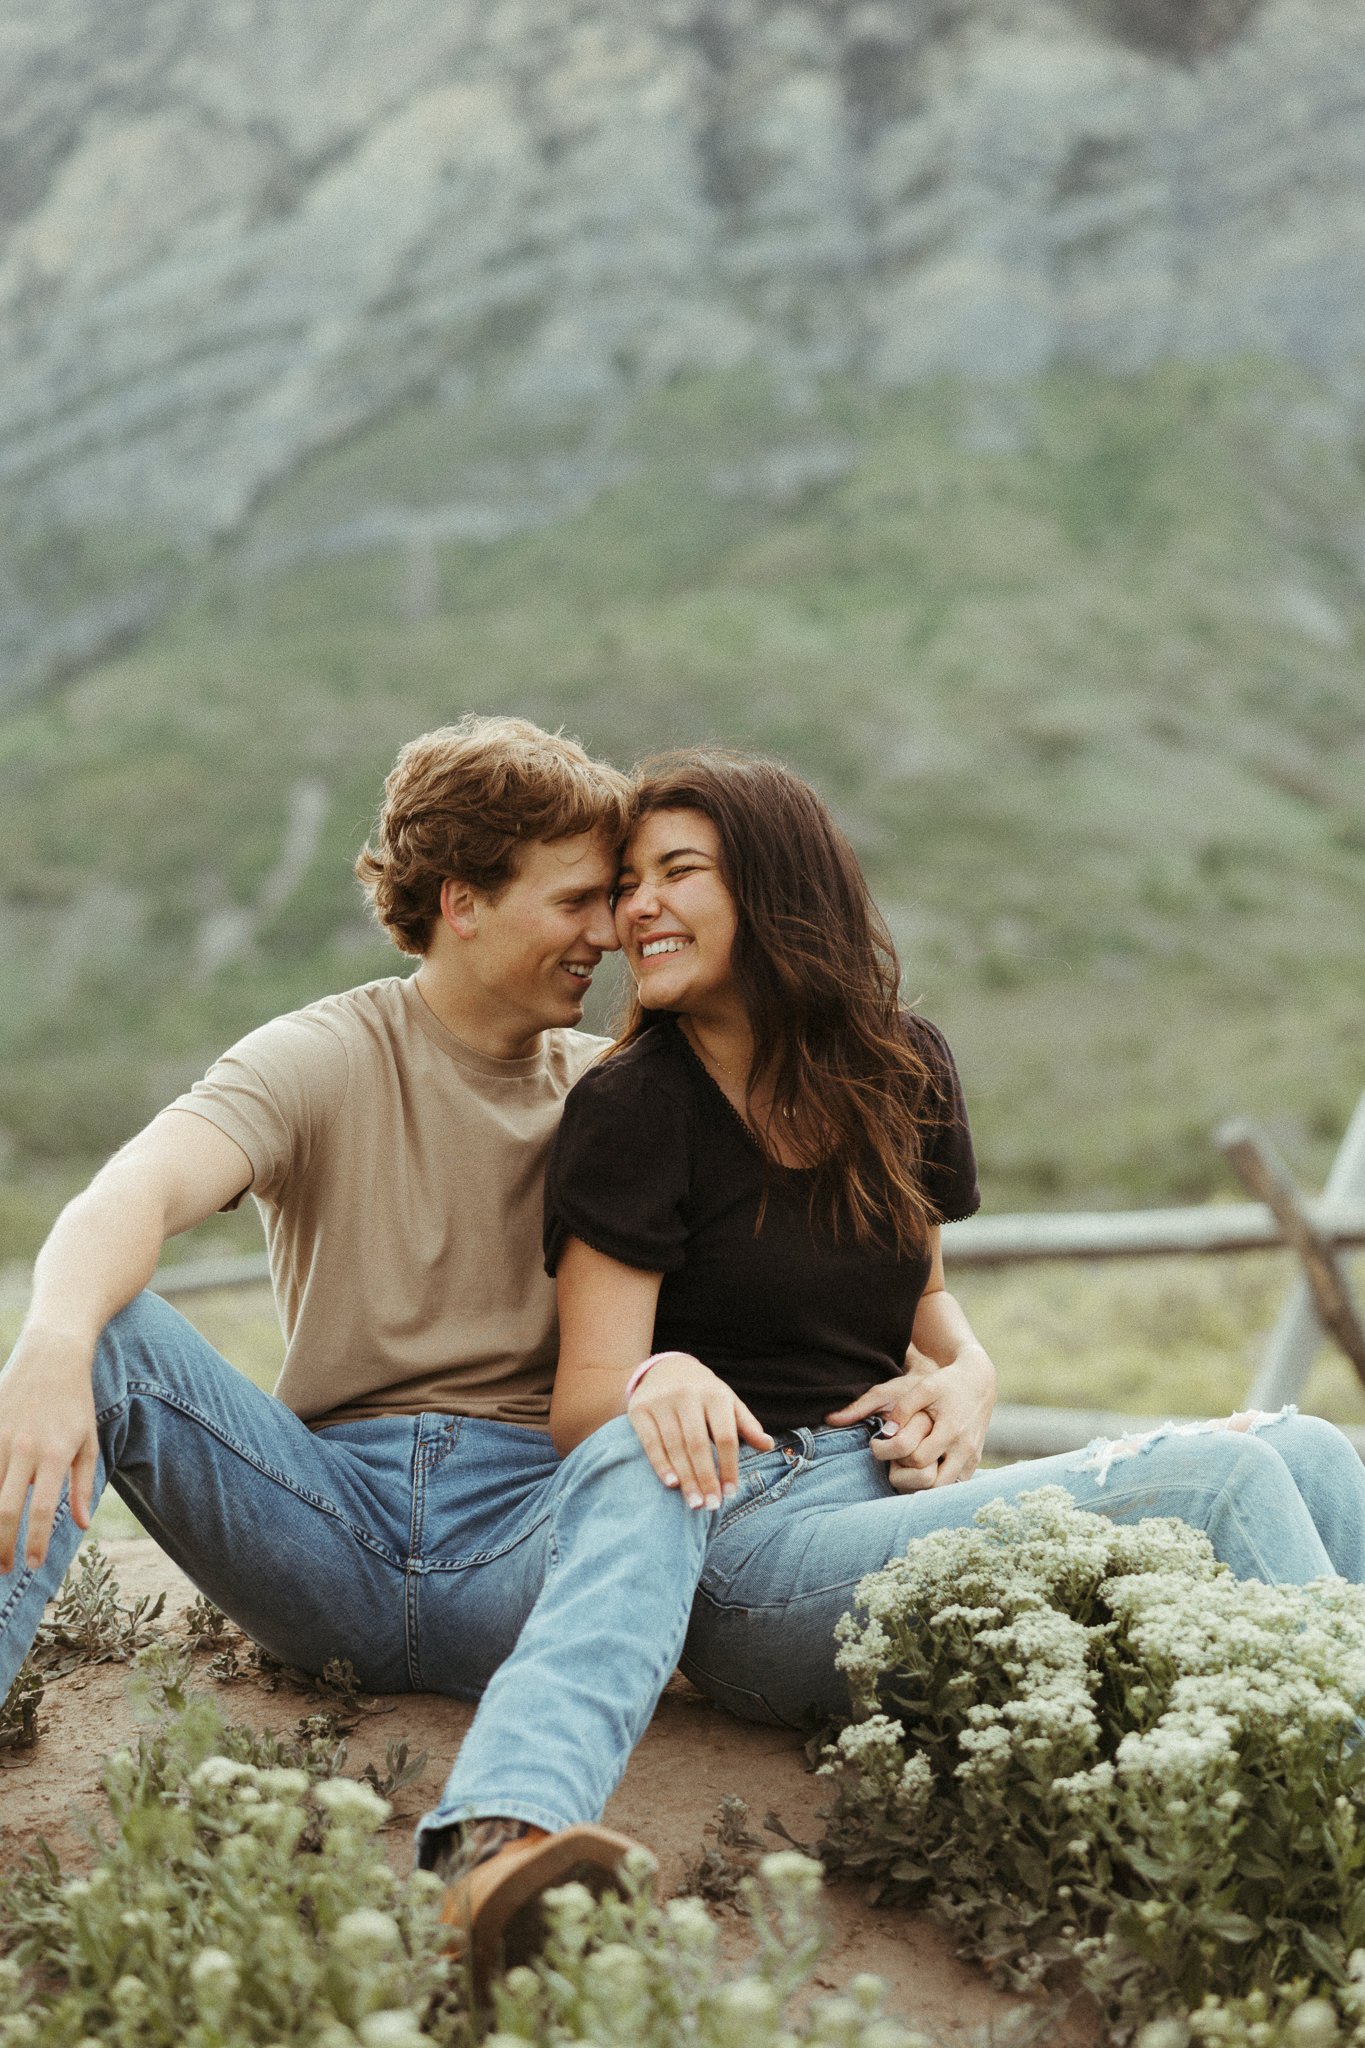 Spring-Provo-Canyon-Wildflowers-Engagement-Session-67